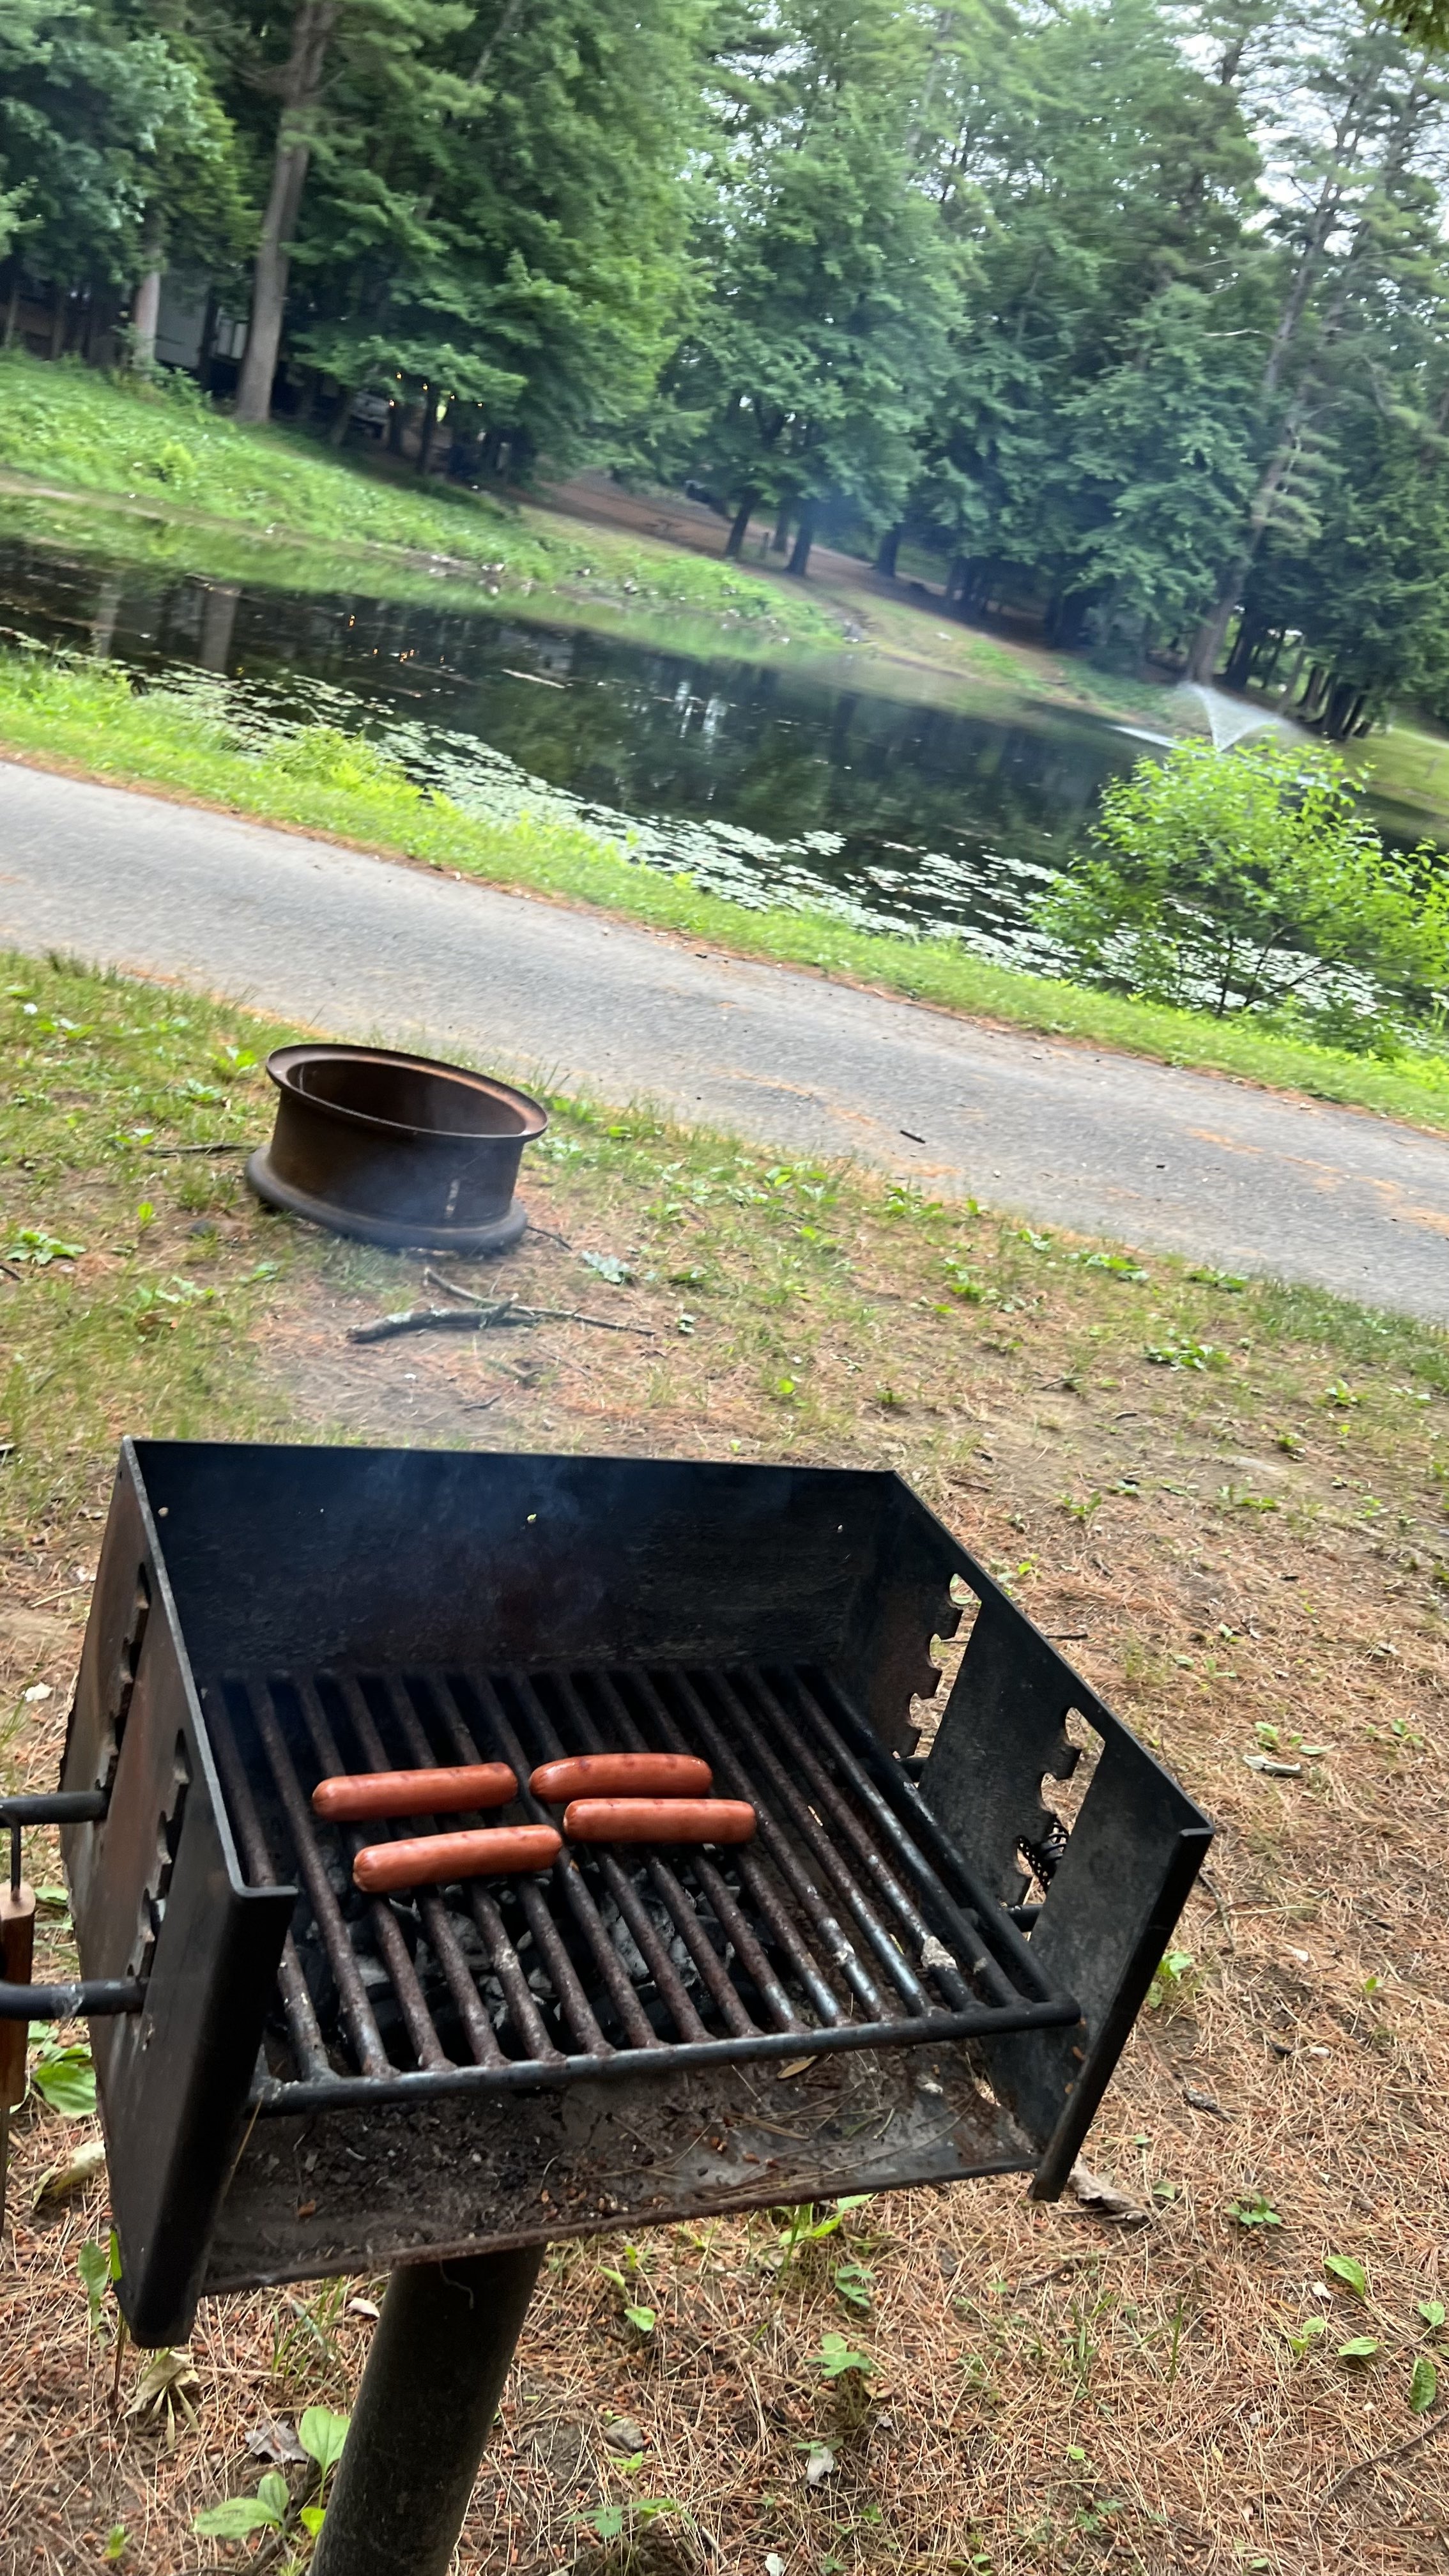 cooking while camping